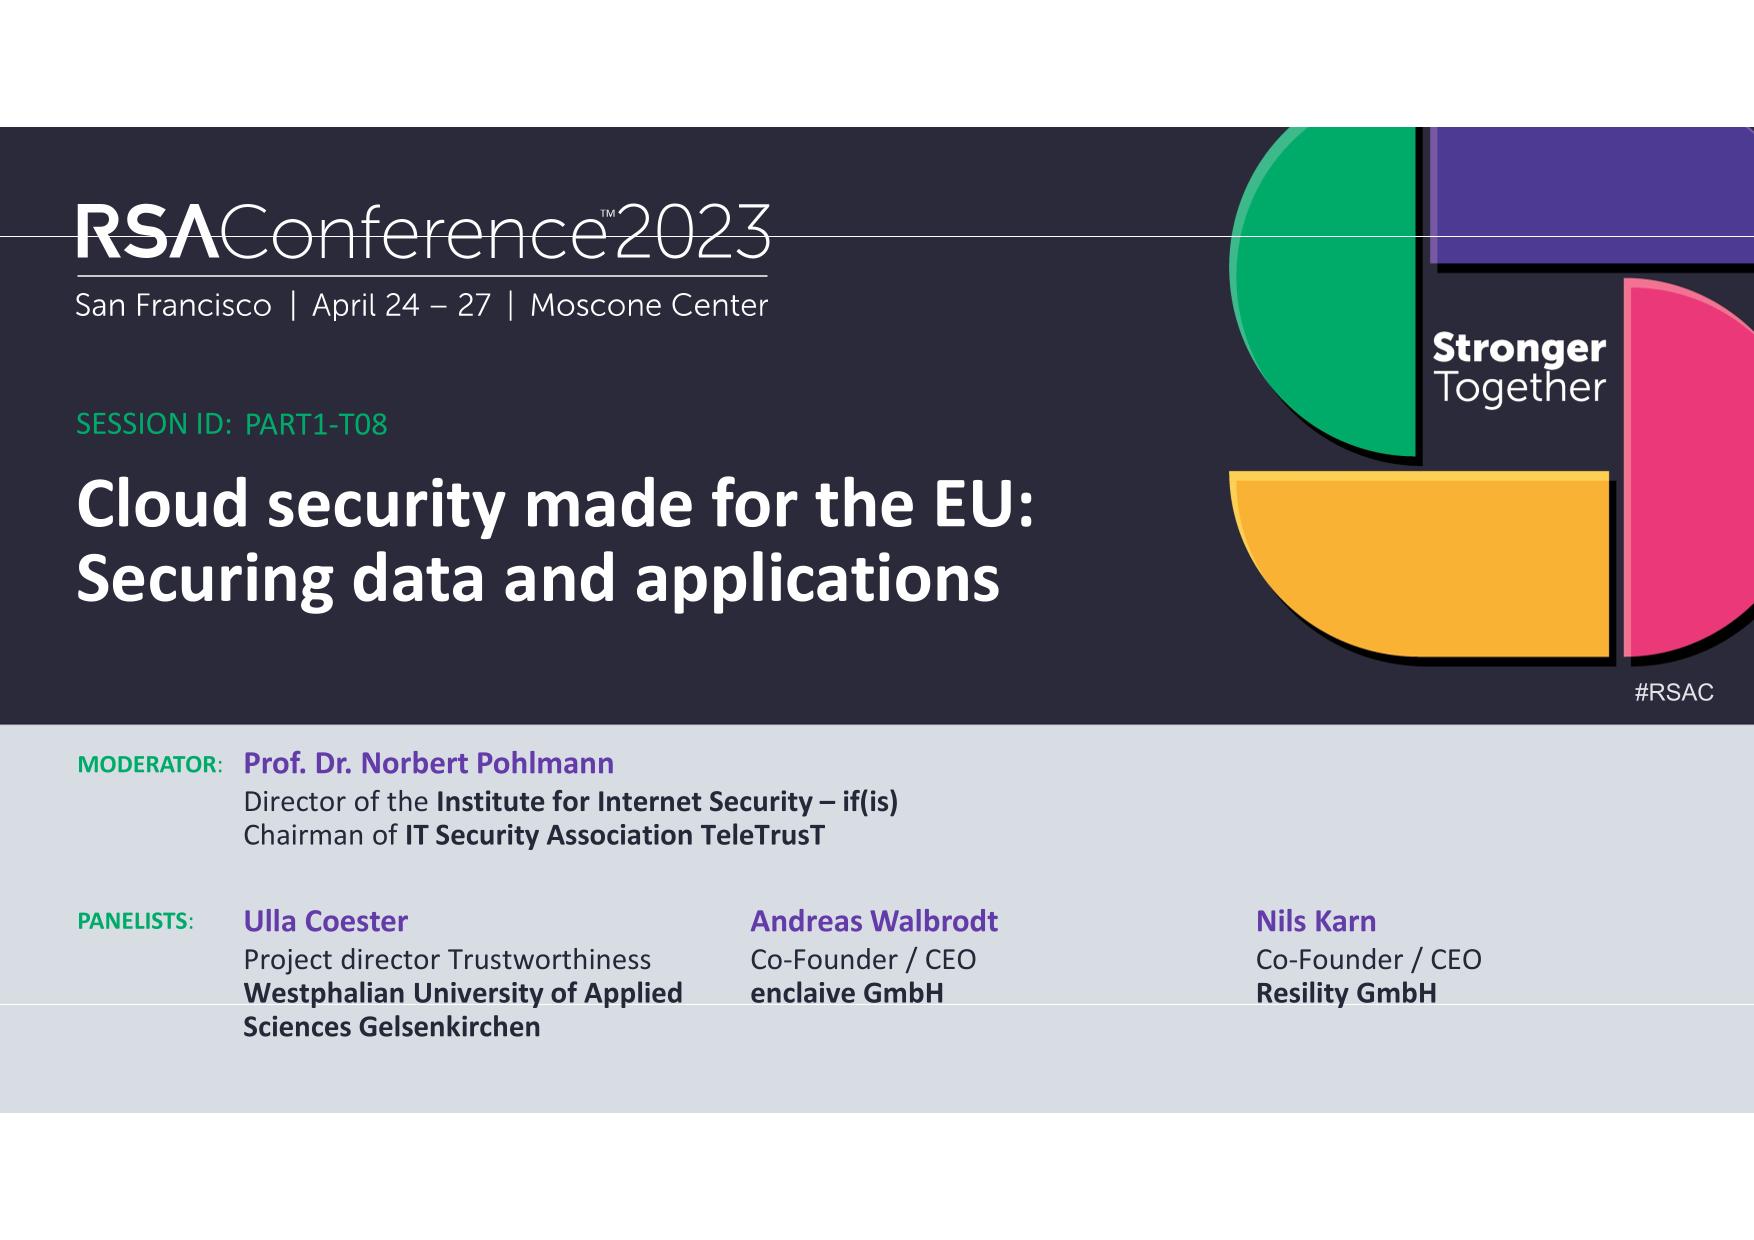 Cloud security made for the EU: Securing data and applications